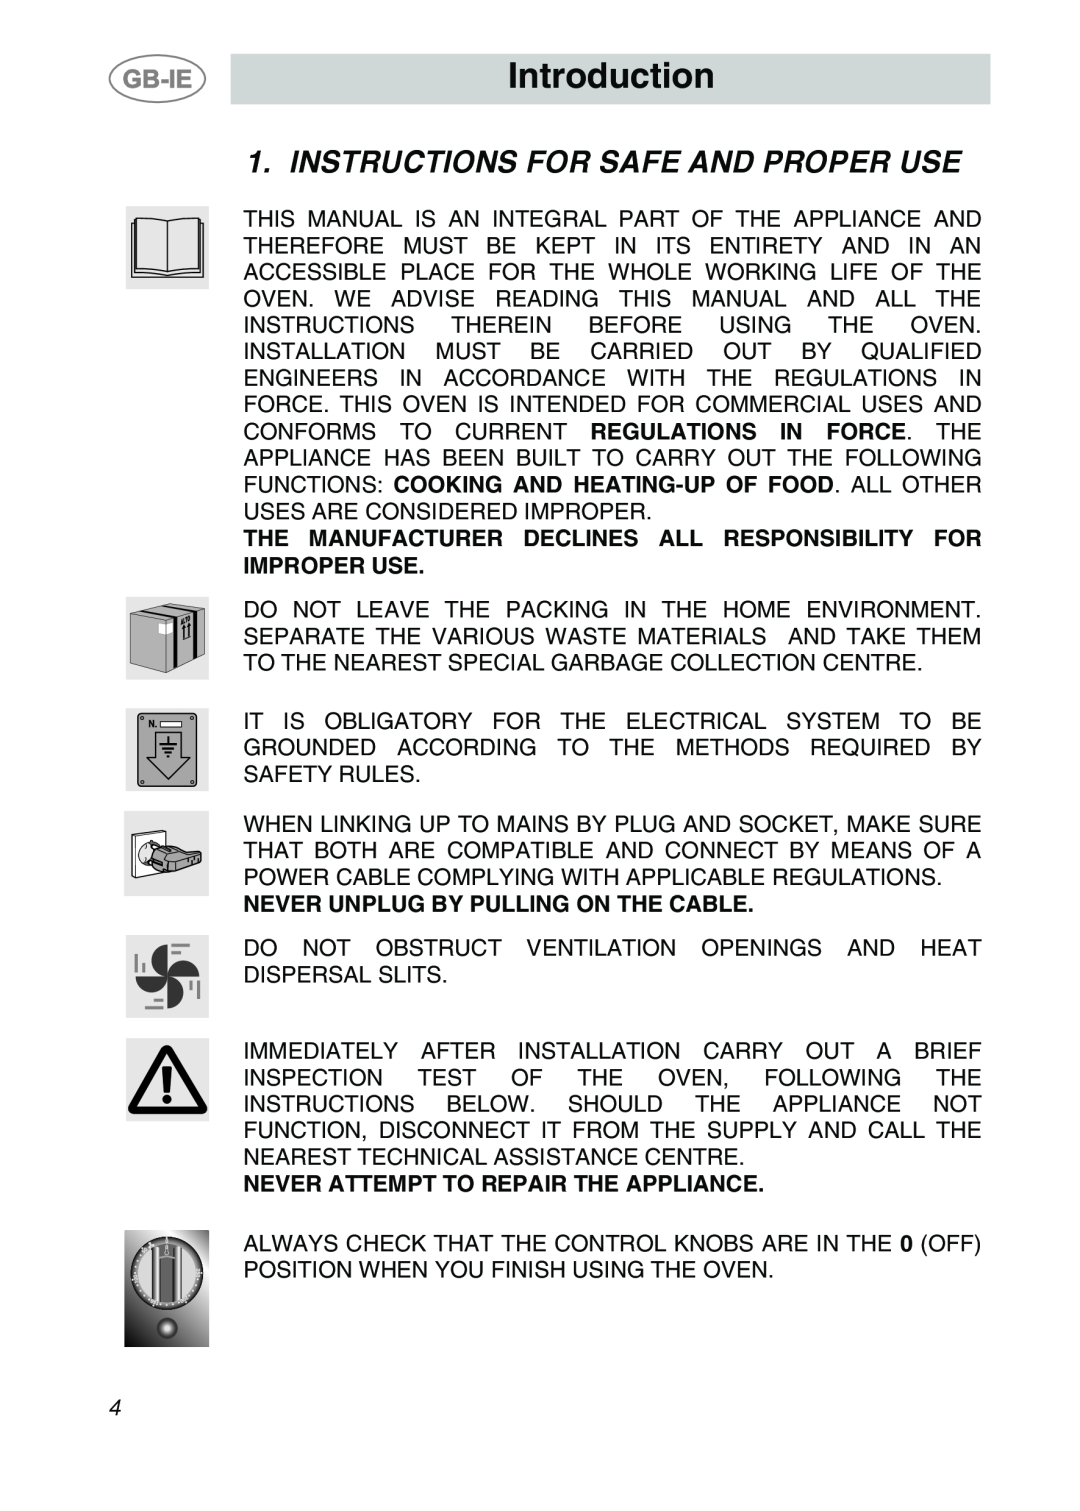 Smeg ALFA41UK manual Introduction, Instructions For Safe And Proper Use, Never Unplug By Pulling On The Cable 